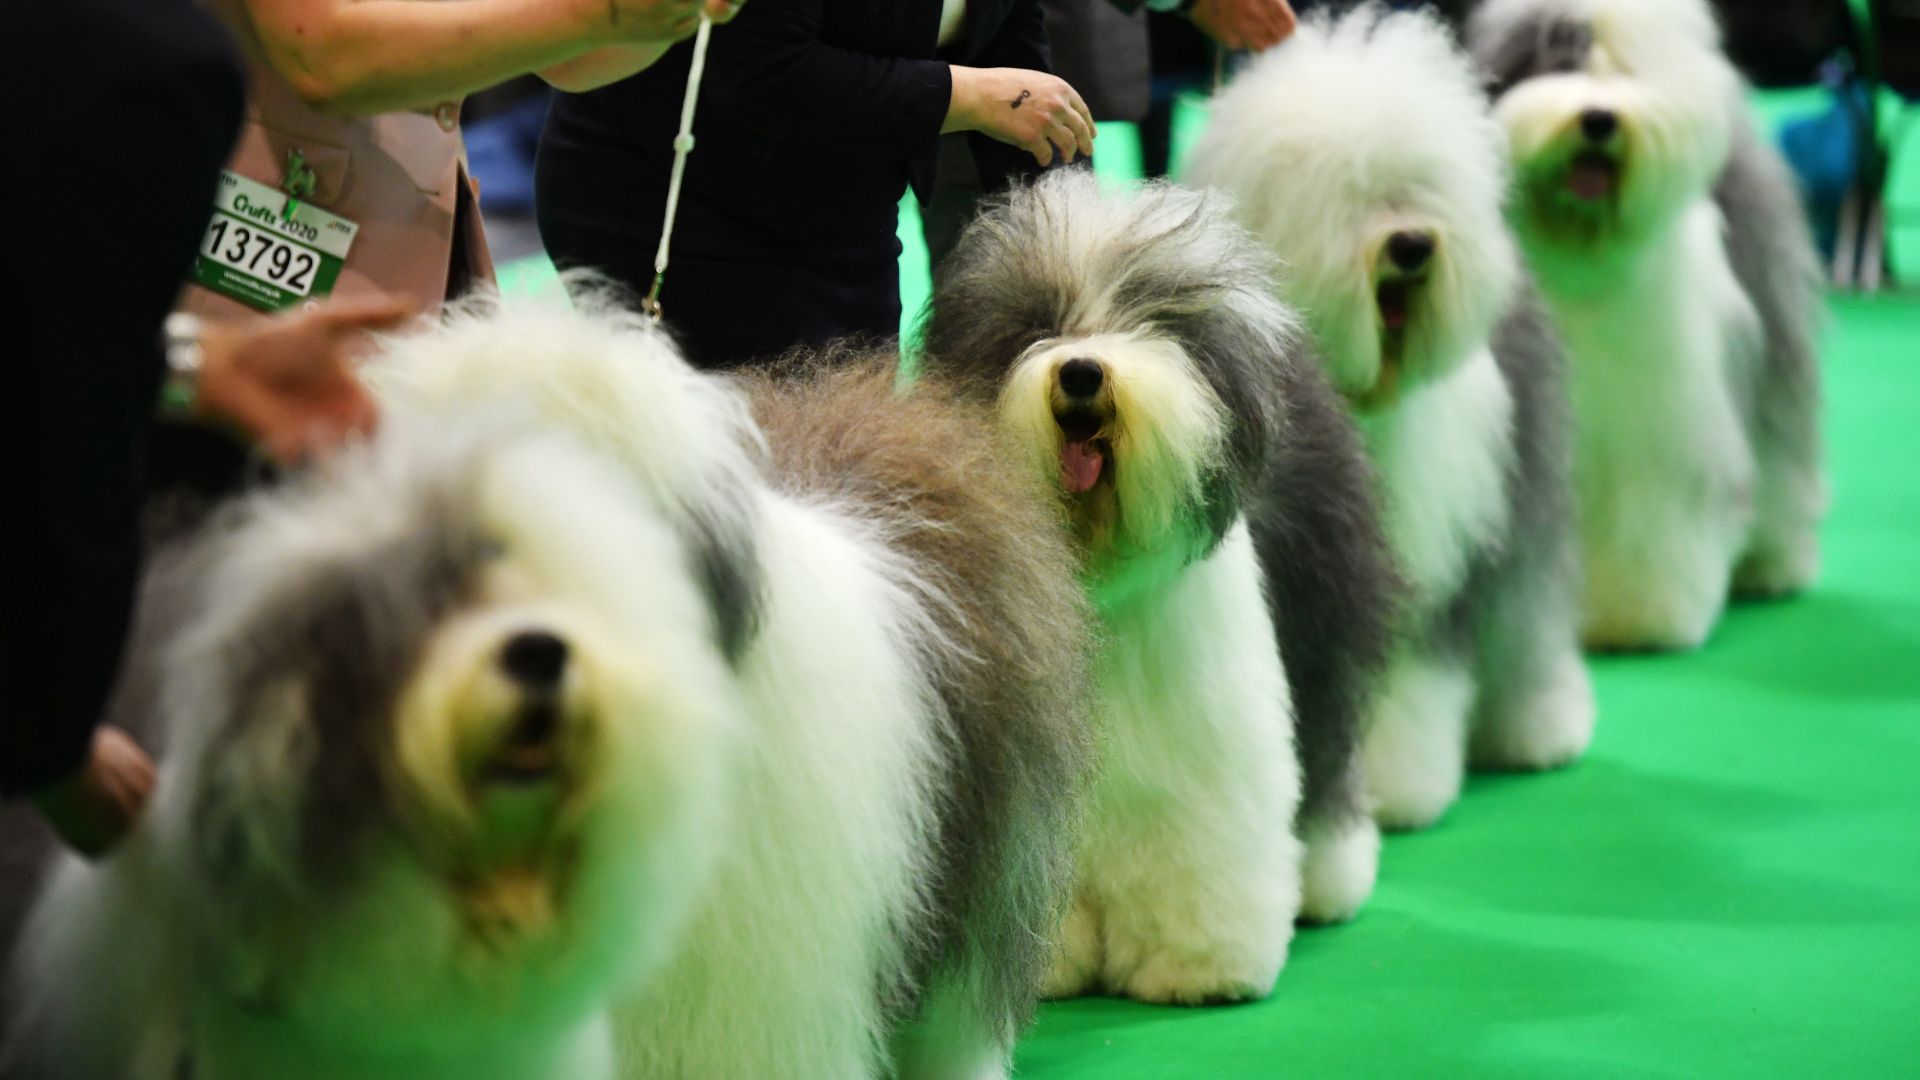 Crufts 2022 live stream how to watch online and on TV, Best in Show